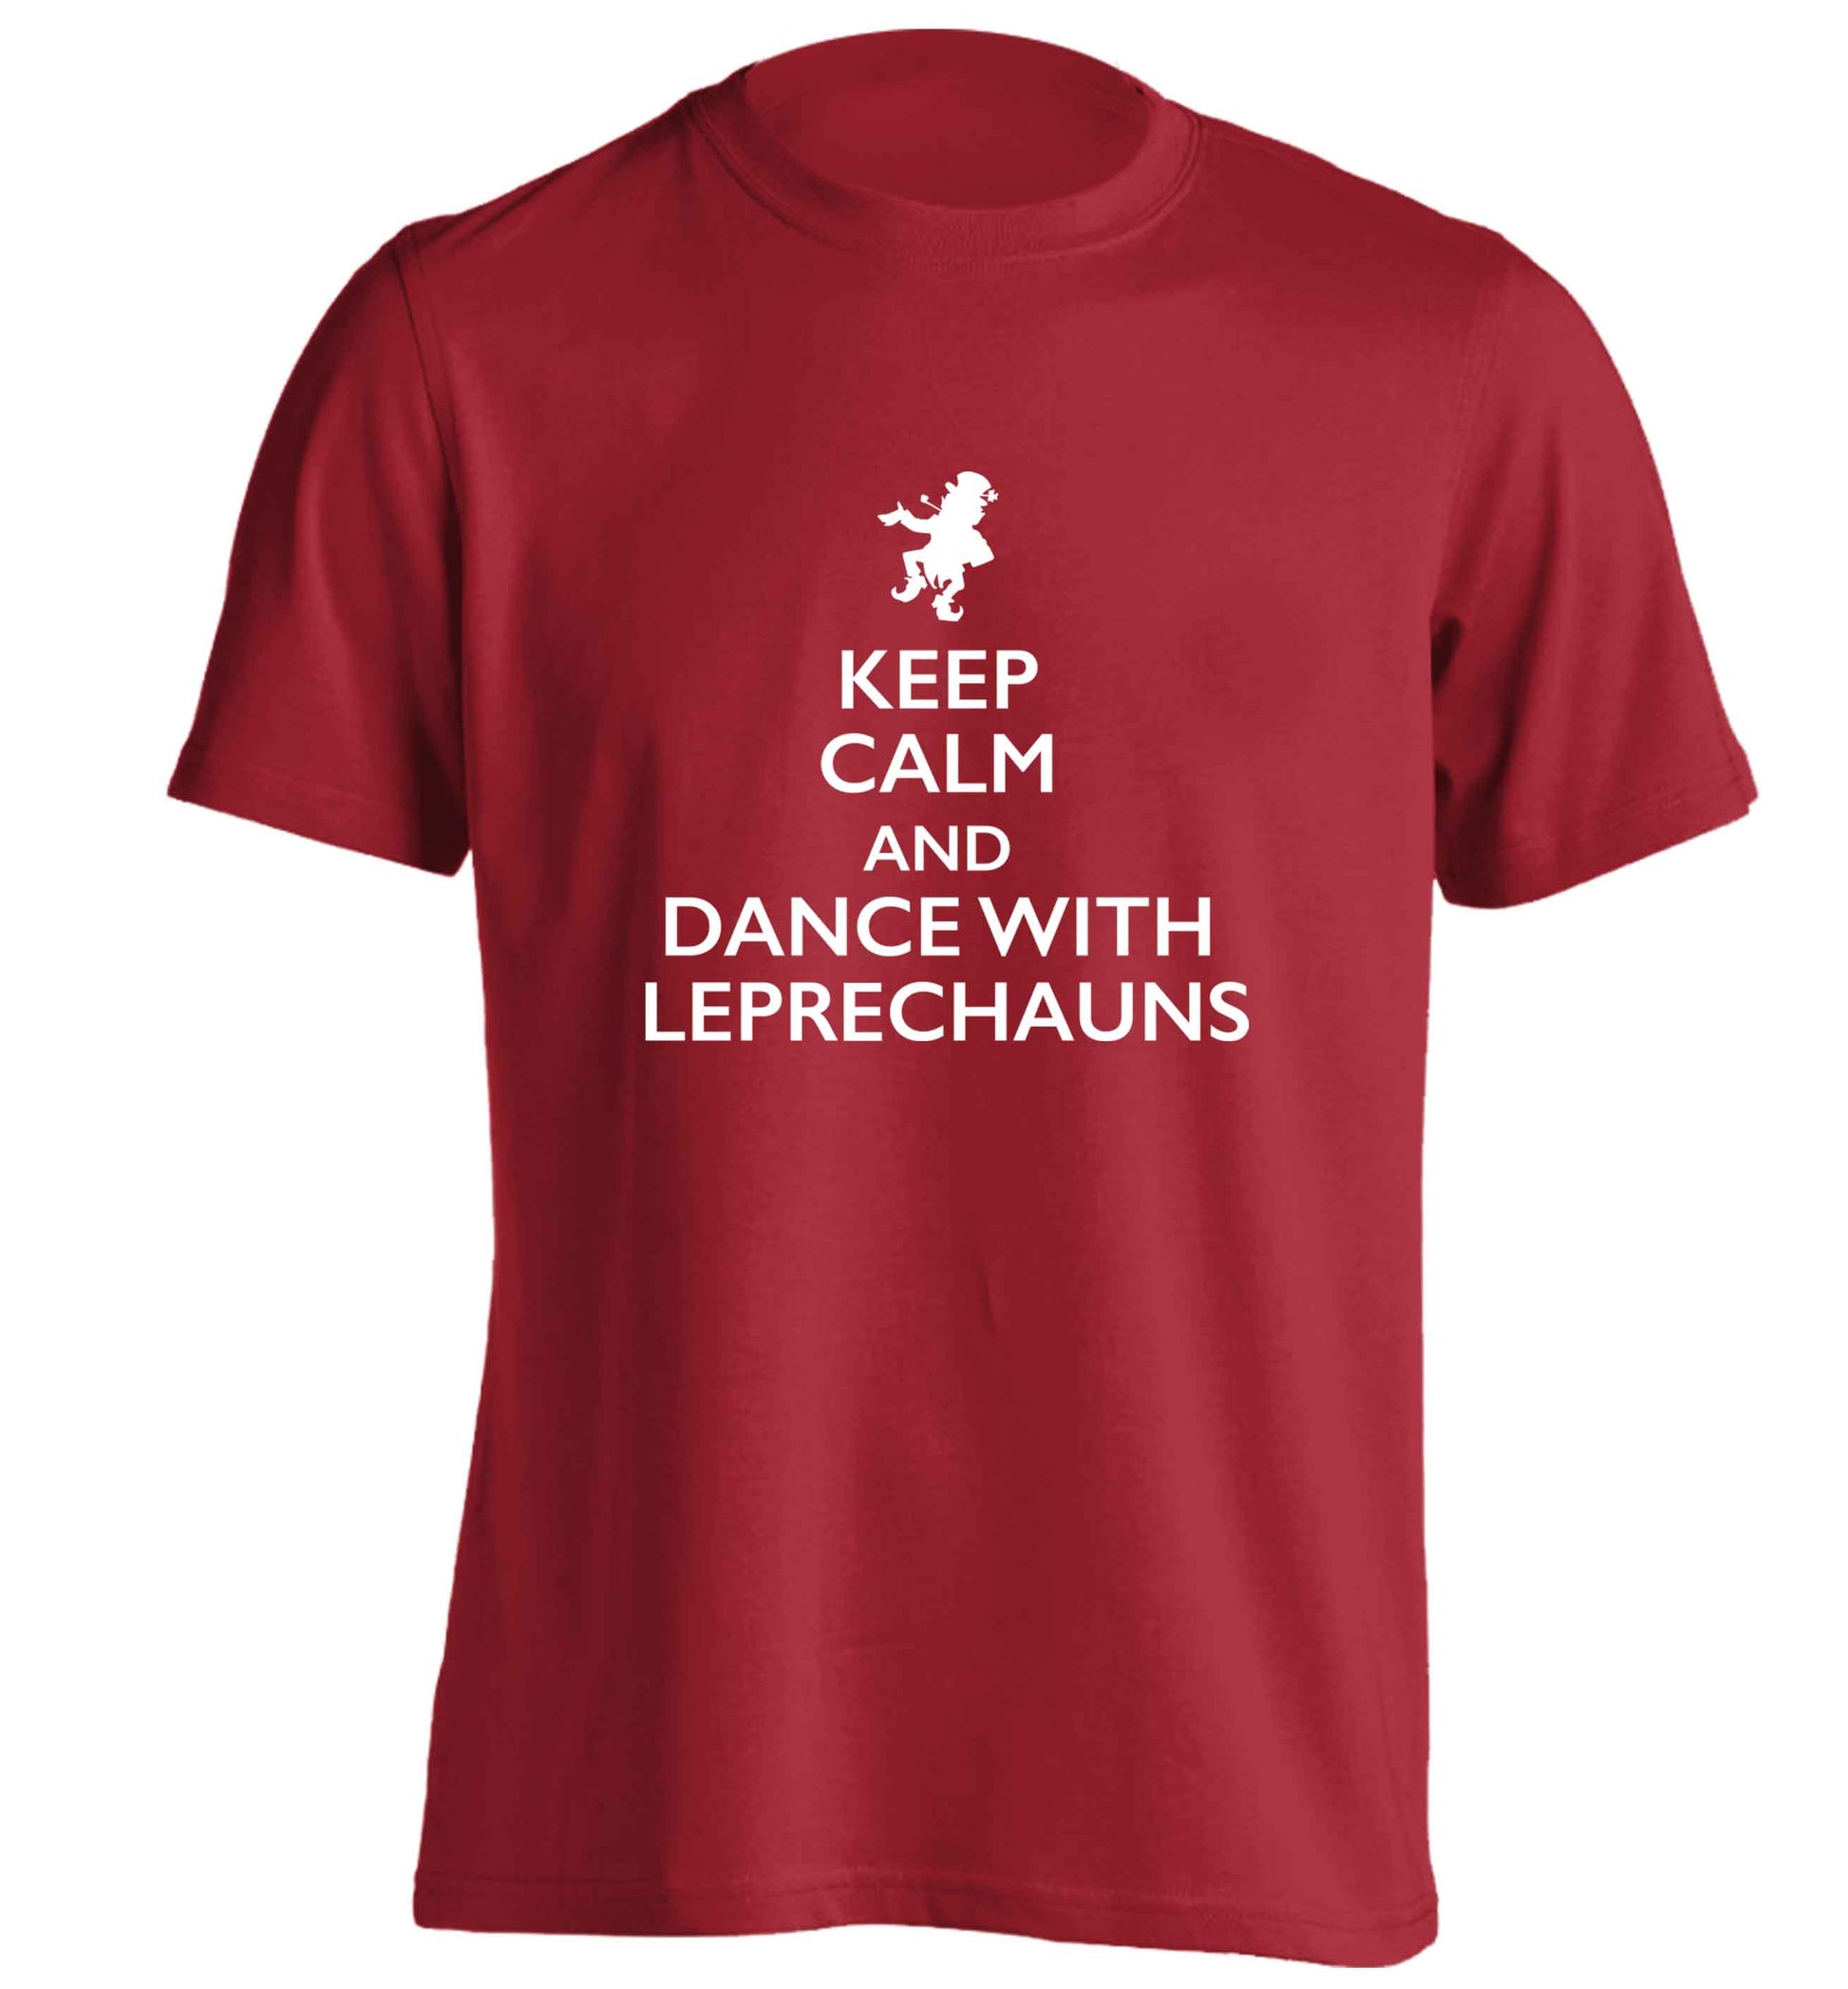 Keep calm and dance with leprechauns adults unisex red Tshirt 2XL